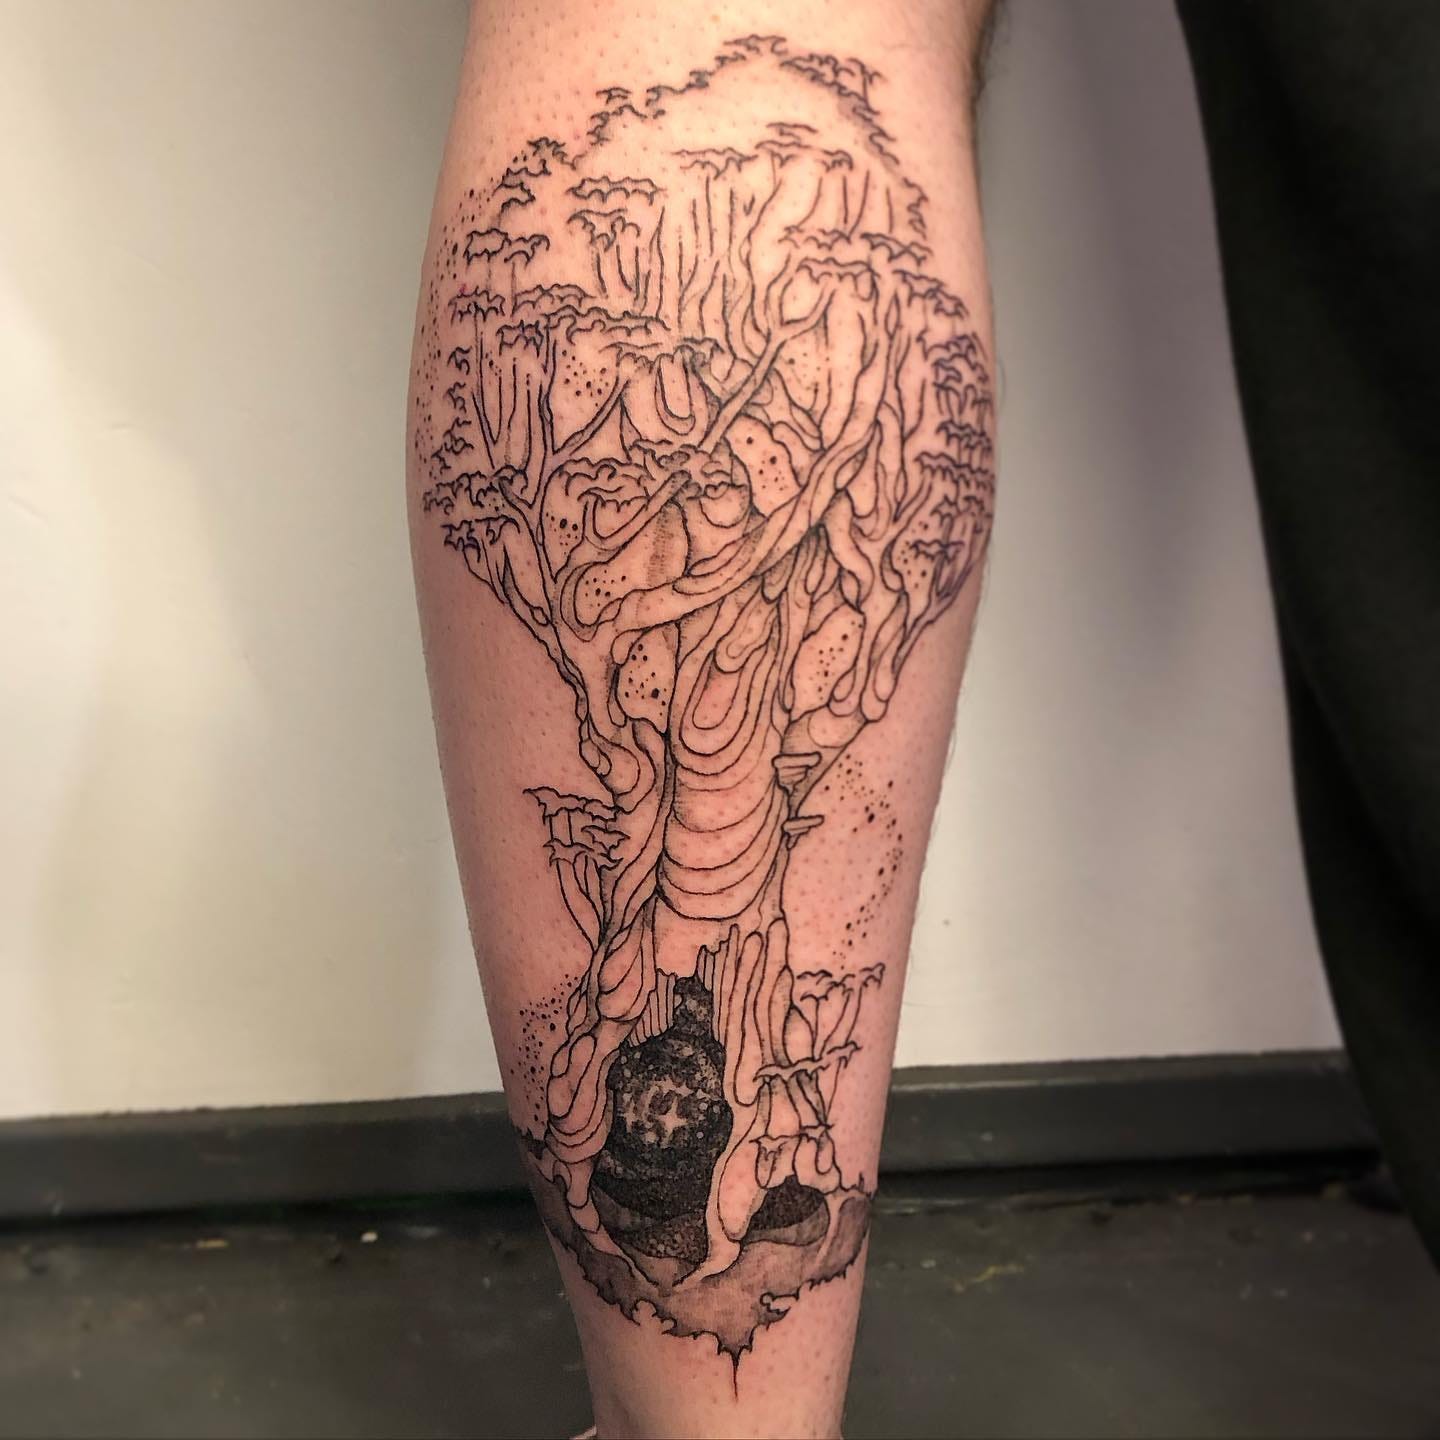 a tattoo for Ashley by bug on the back of her calf of a big tree with a sparkly void portal at the base she has a light skin tone and its done in black ink